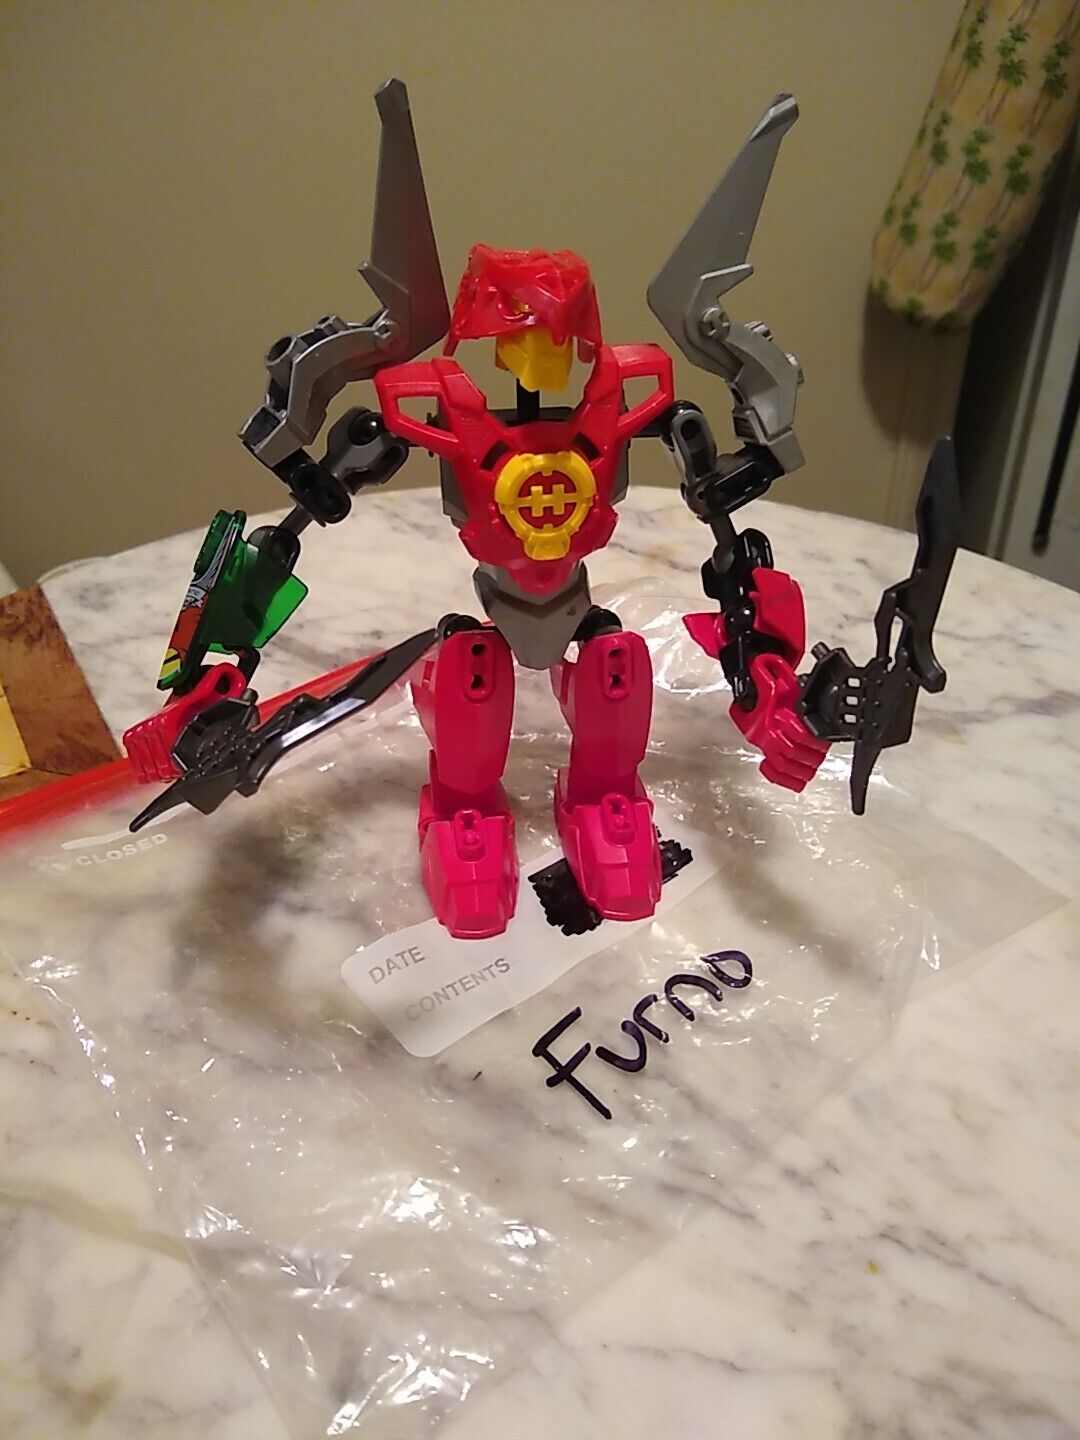 Hero Factory  WILLIAM FURNO -  Lego Bionicle Figure with Weapons